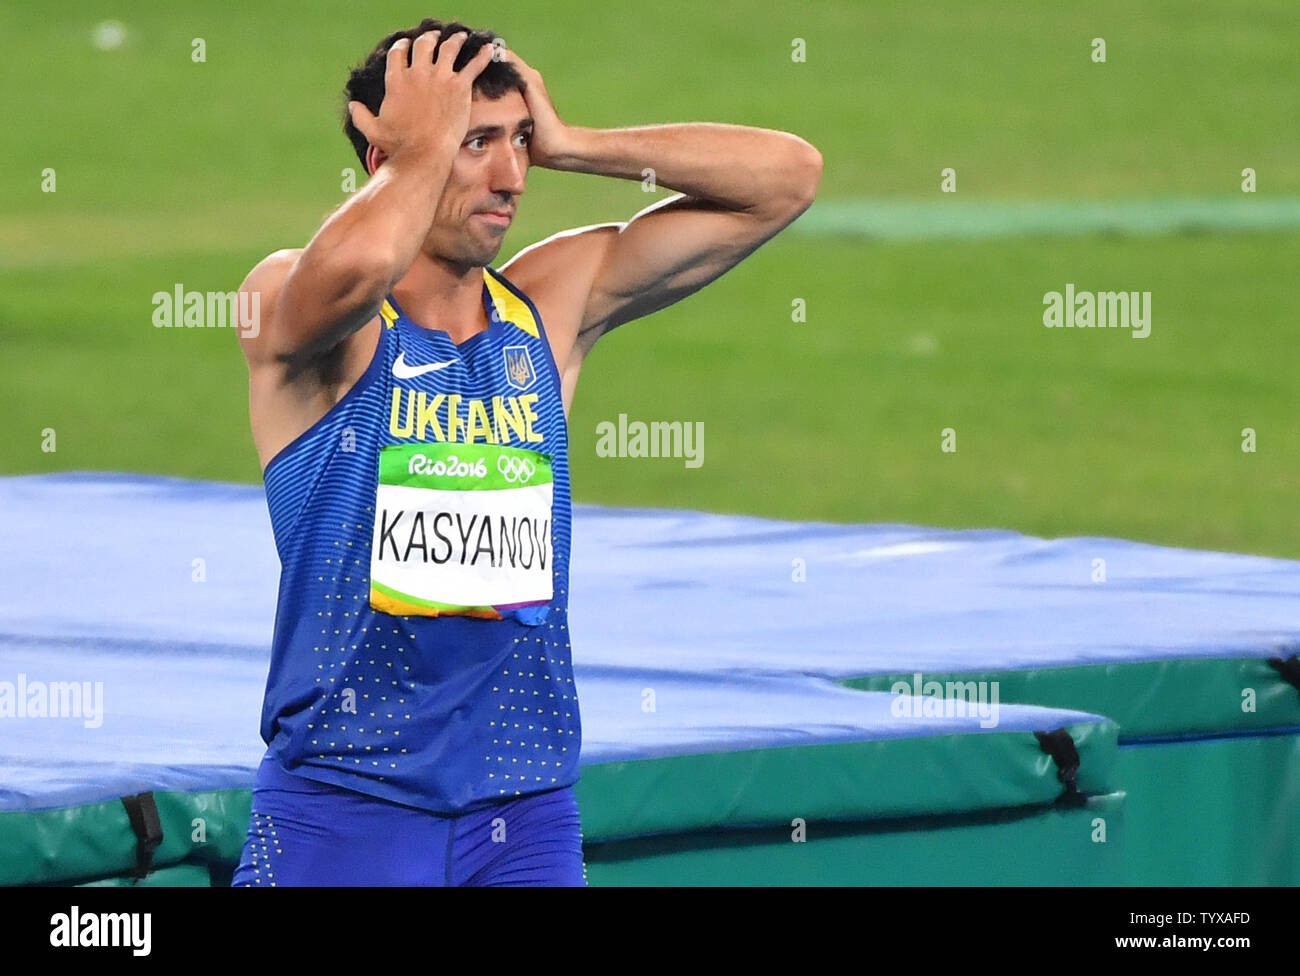 Oleksiy Kasyanov of the Ukraine reacts after a jump when he competes in the Men's Decathlon High Jump at the Olympic Stadium at the 2016 Rio Summer Olympics in Rio de Janeiro, Brazil, on August 17, 2016.        Photo by Kevin Dietsch/UPI Stock Photo